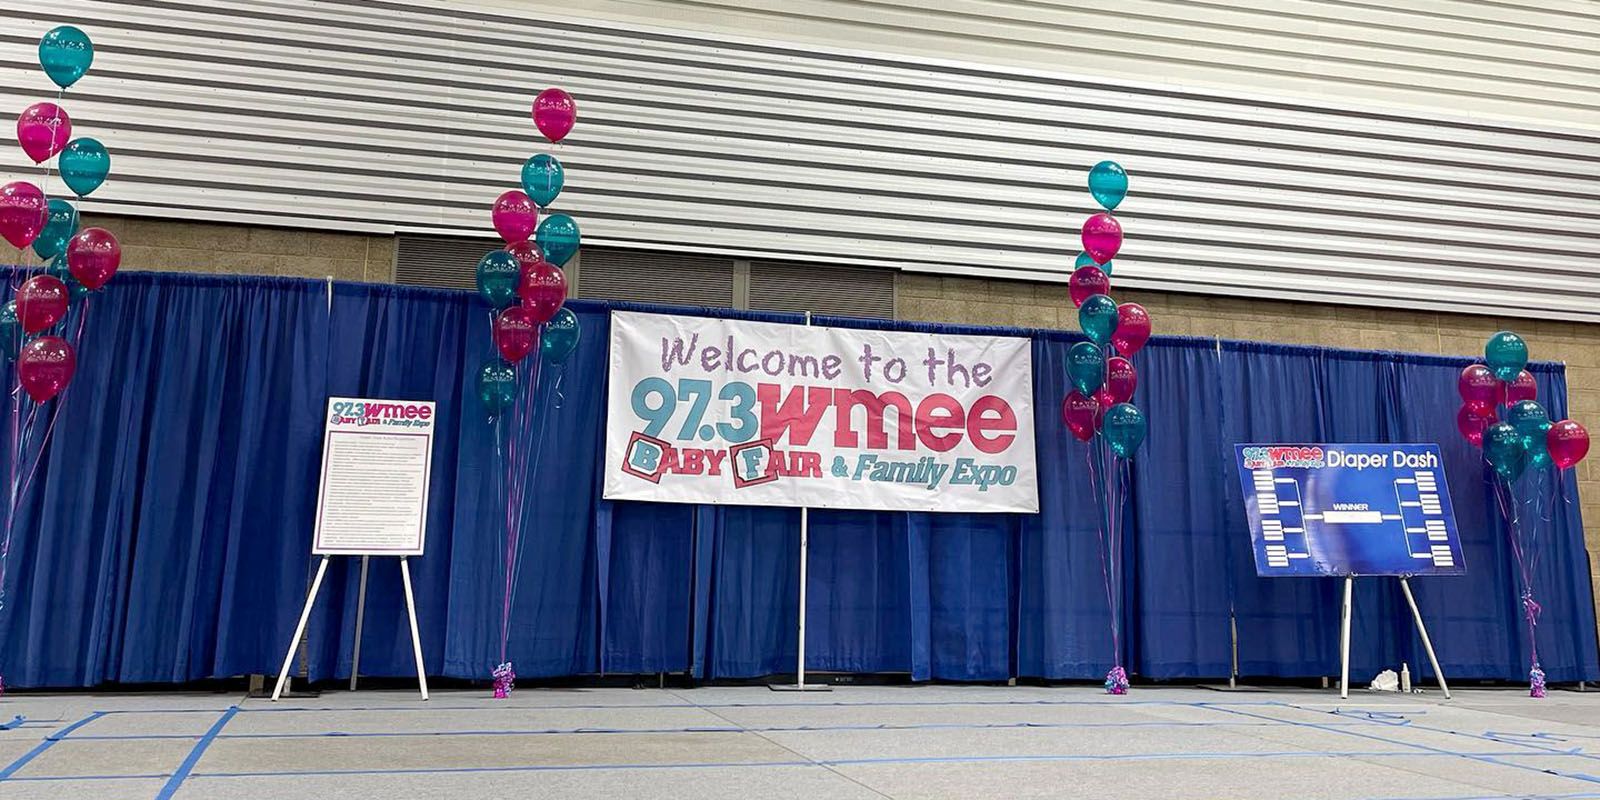 The 97.3 WMEE Baby Fair & Family Expo will be Saturday, Feb. 25, at Memorial Coliseum.